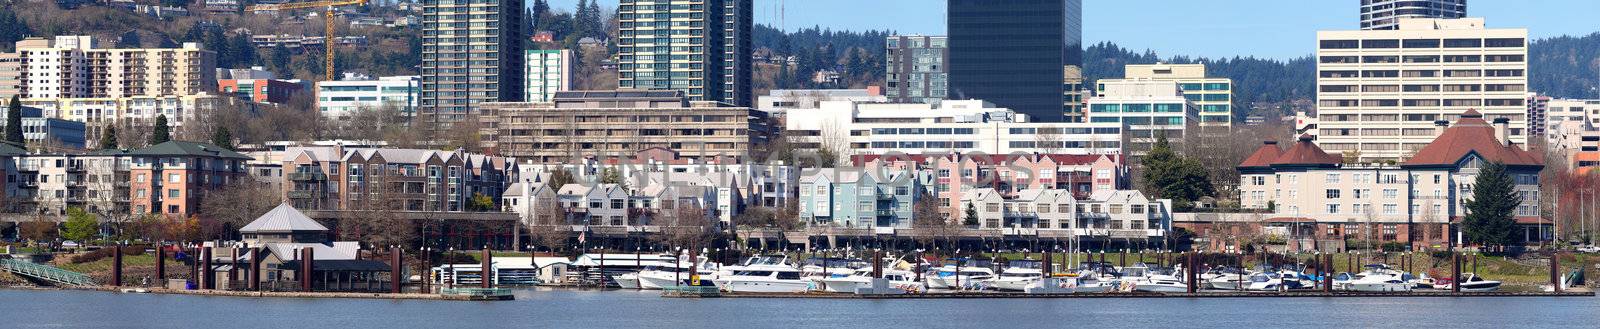 The marina and new condominiums in Portland Oregon downtown.